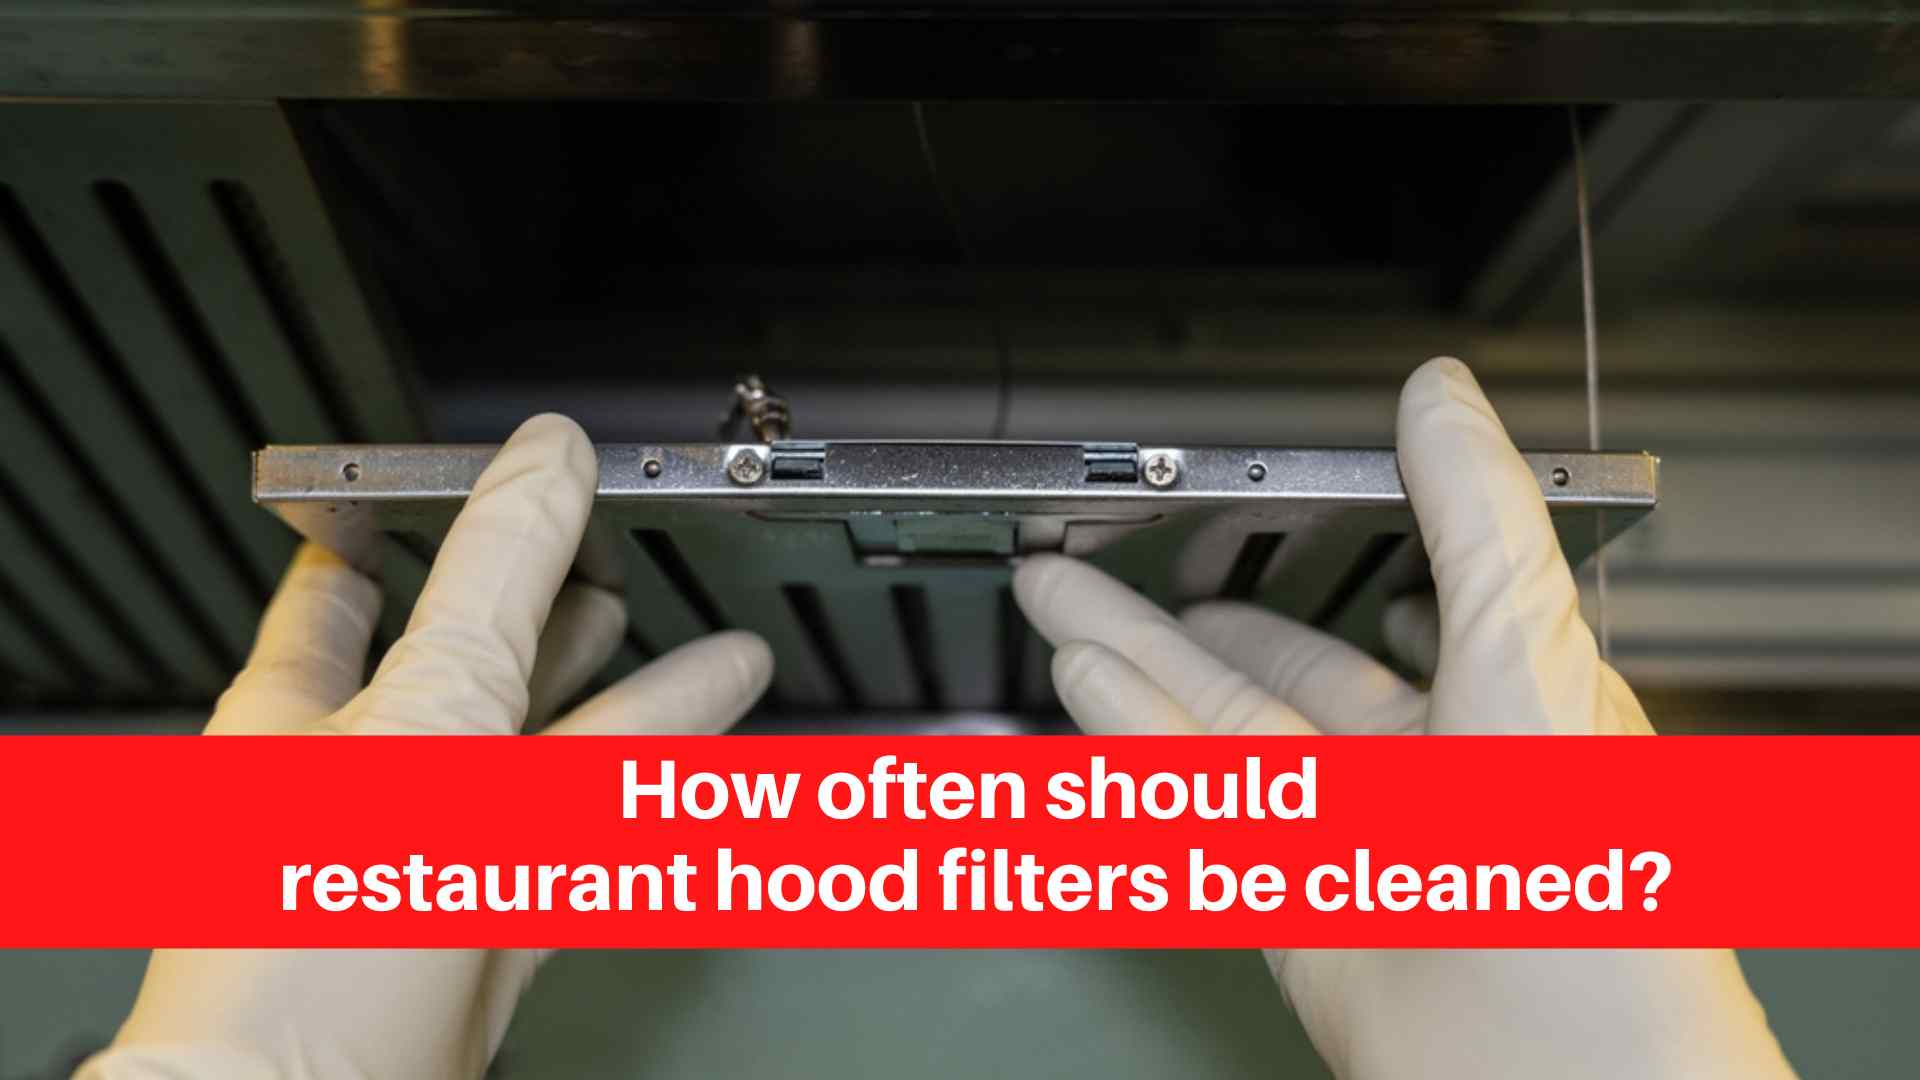 How often should restaurant hood filters be cleaned